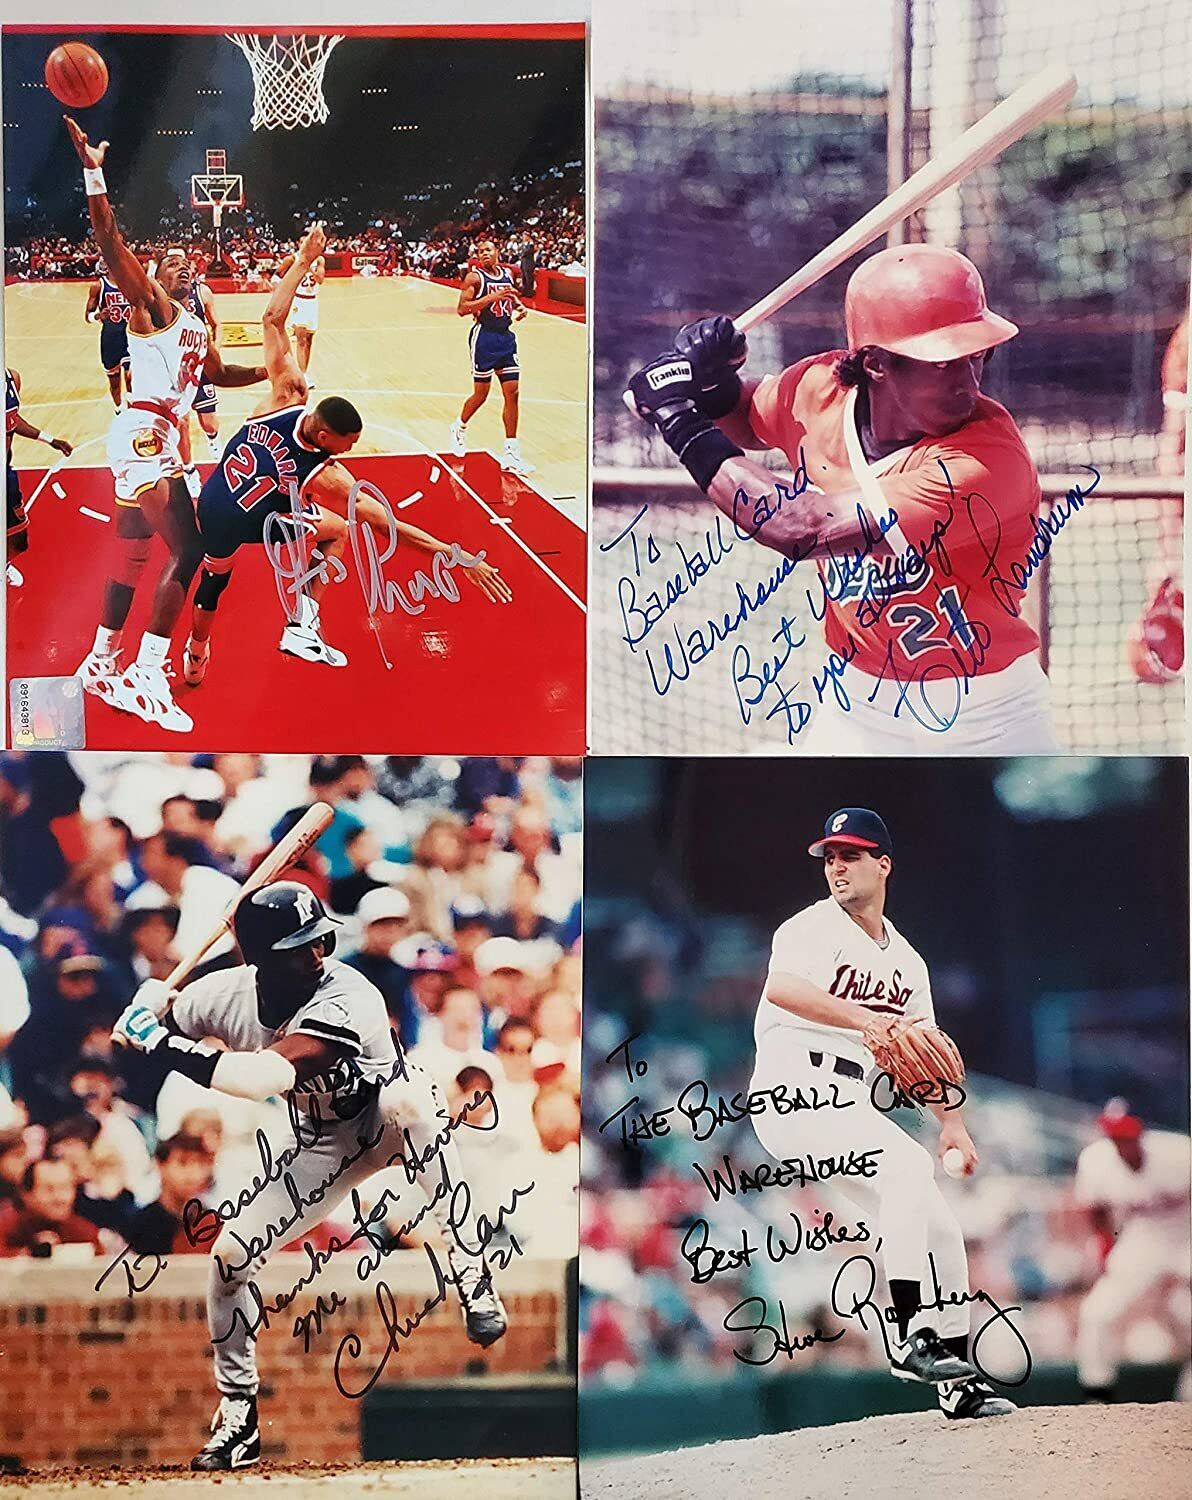 Lot of 11 signed personalized sports photos 8X10 including Tito Landrum, +